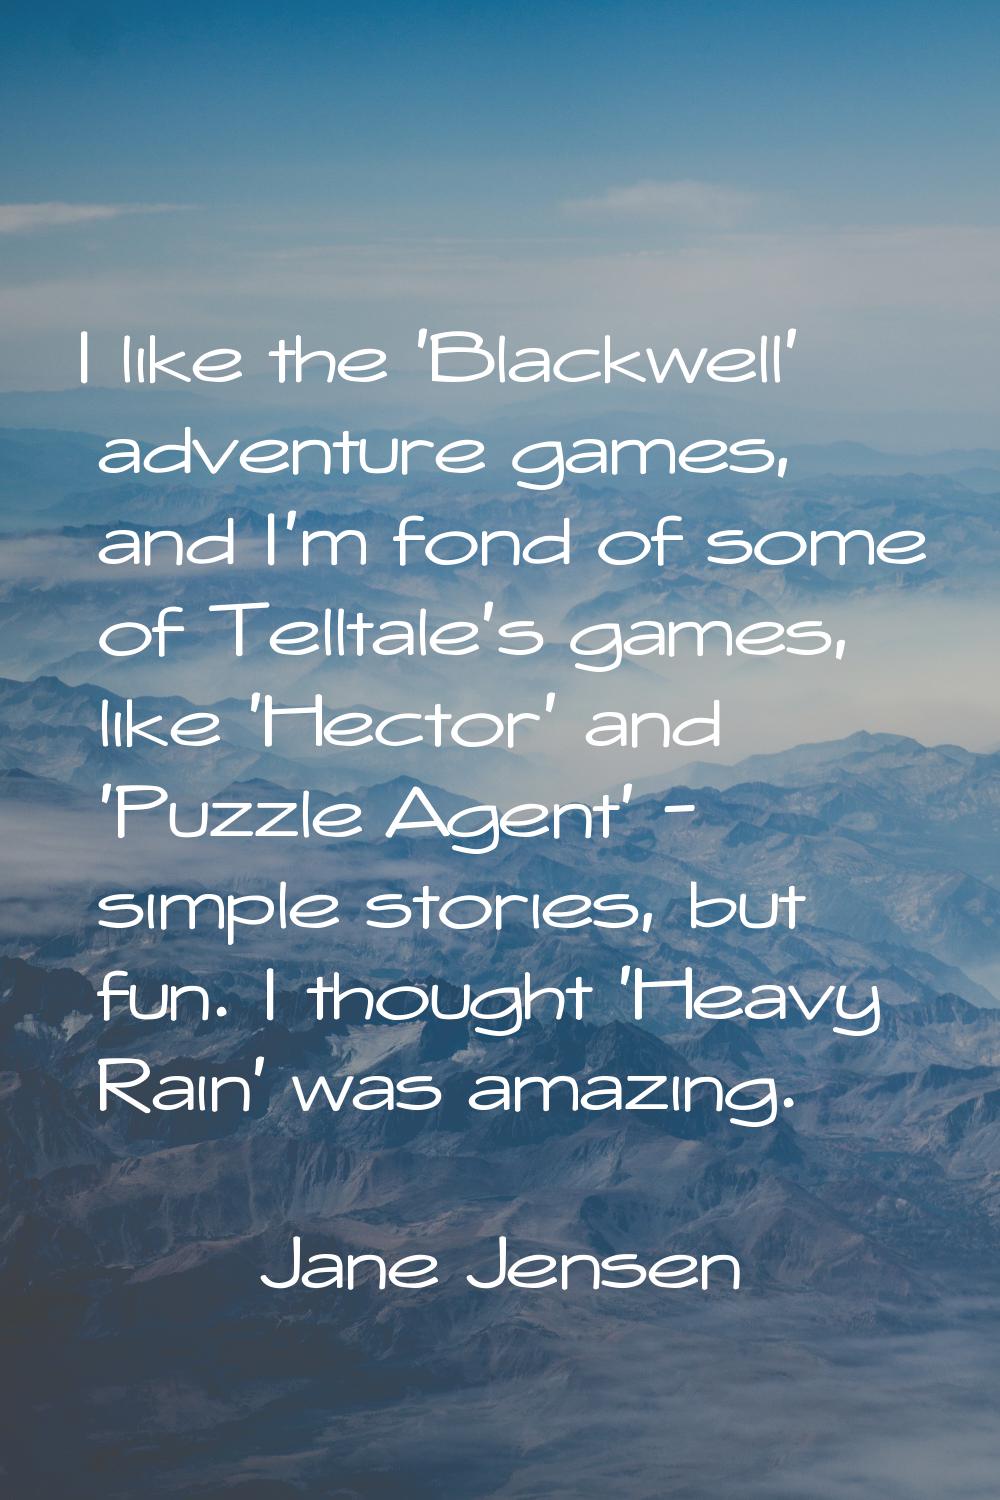 I like the 'Blackwell' adventure games, and I'm fond of some of Telltale's games, like 'Hector' and